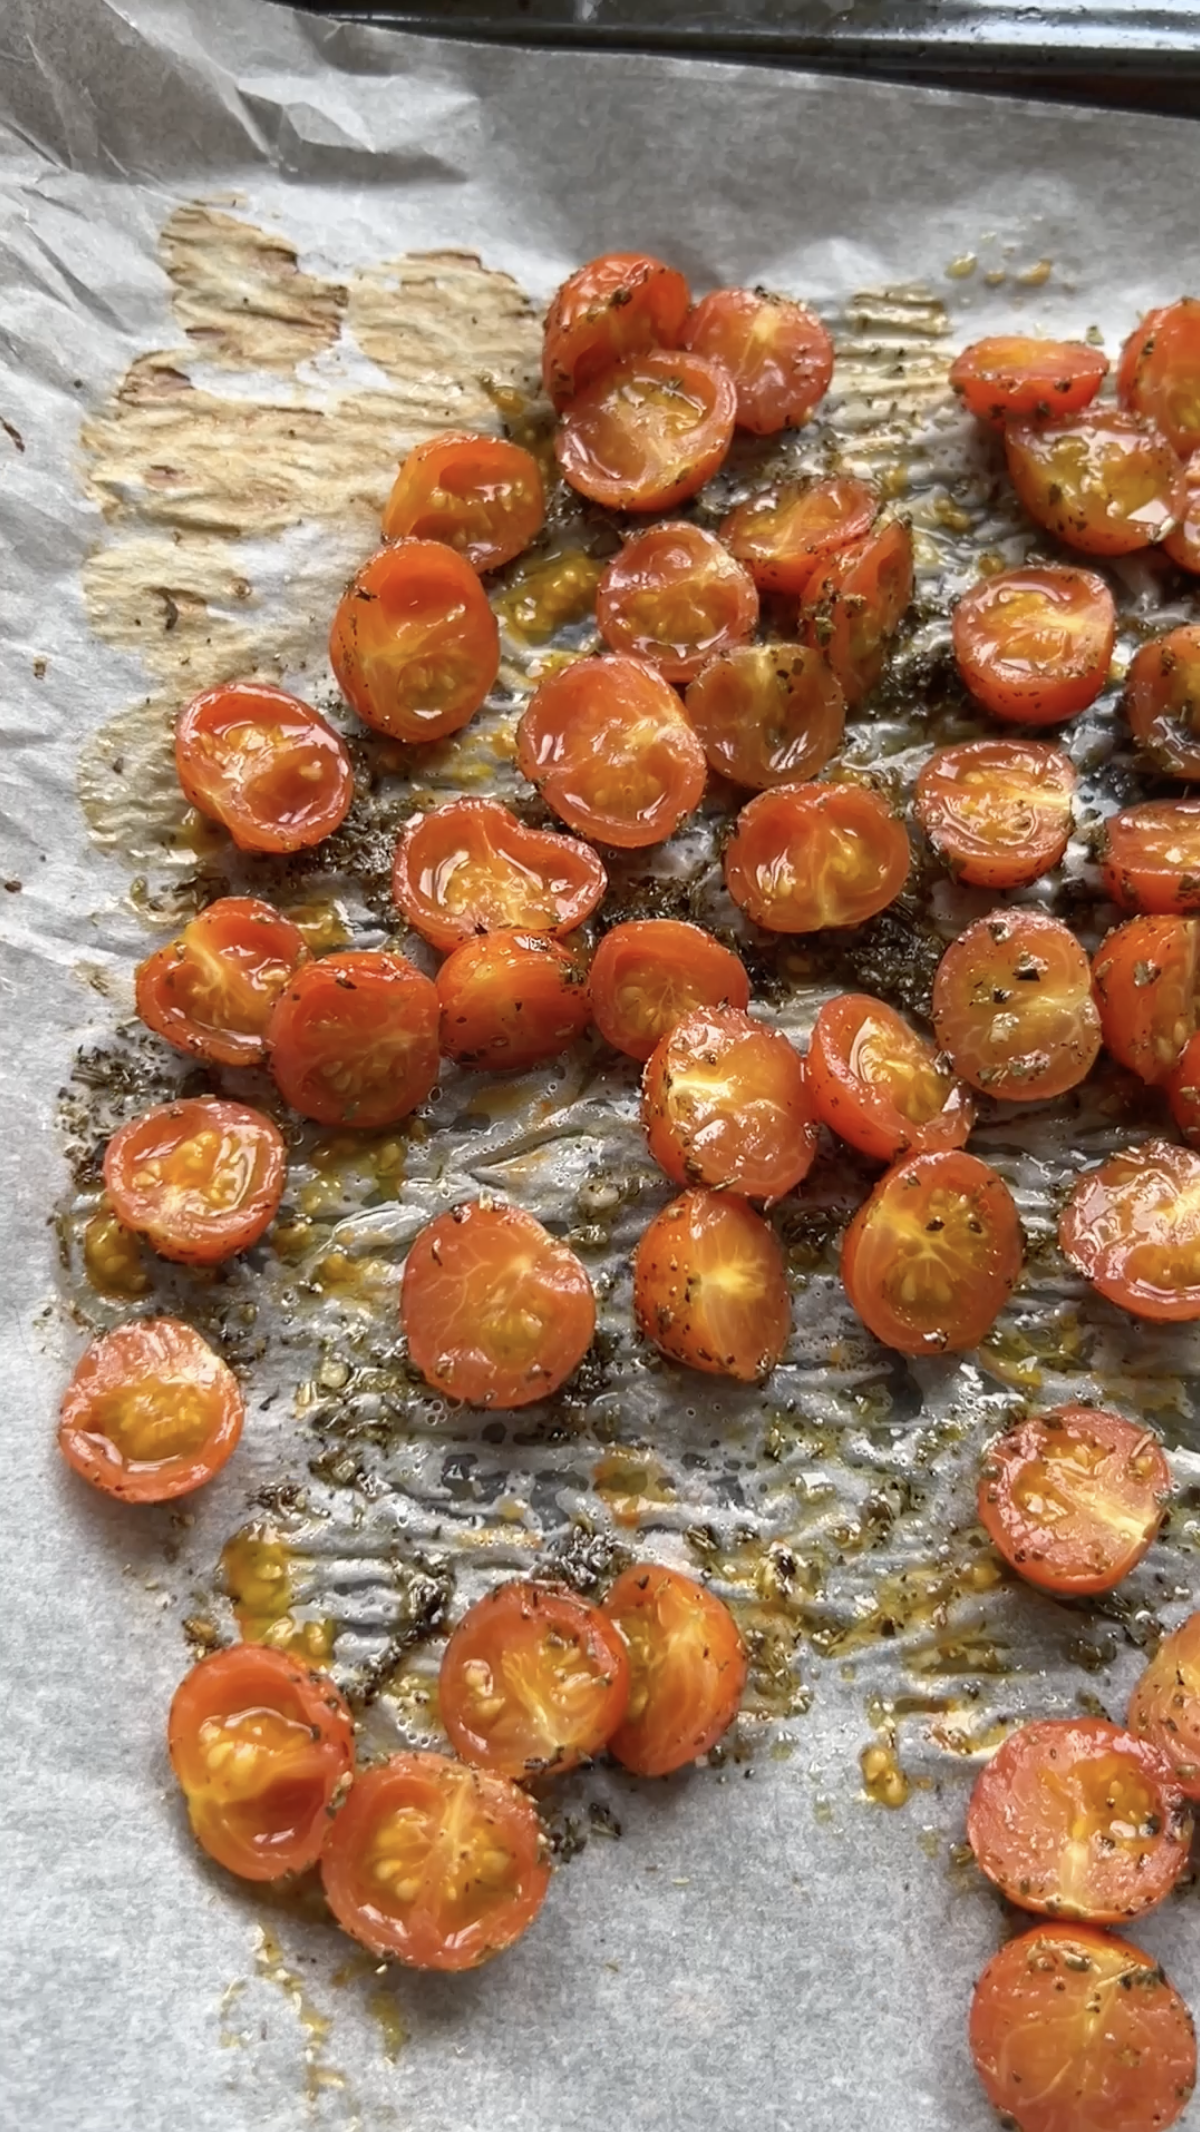 Cherry tomatoes cut in half, halfway through baking, on a sheet of baking paper.